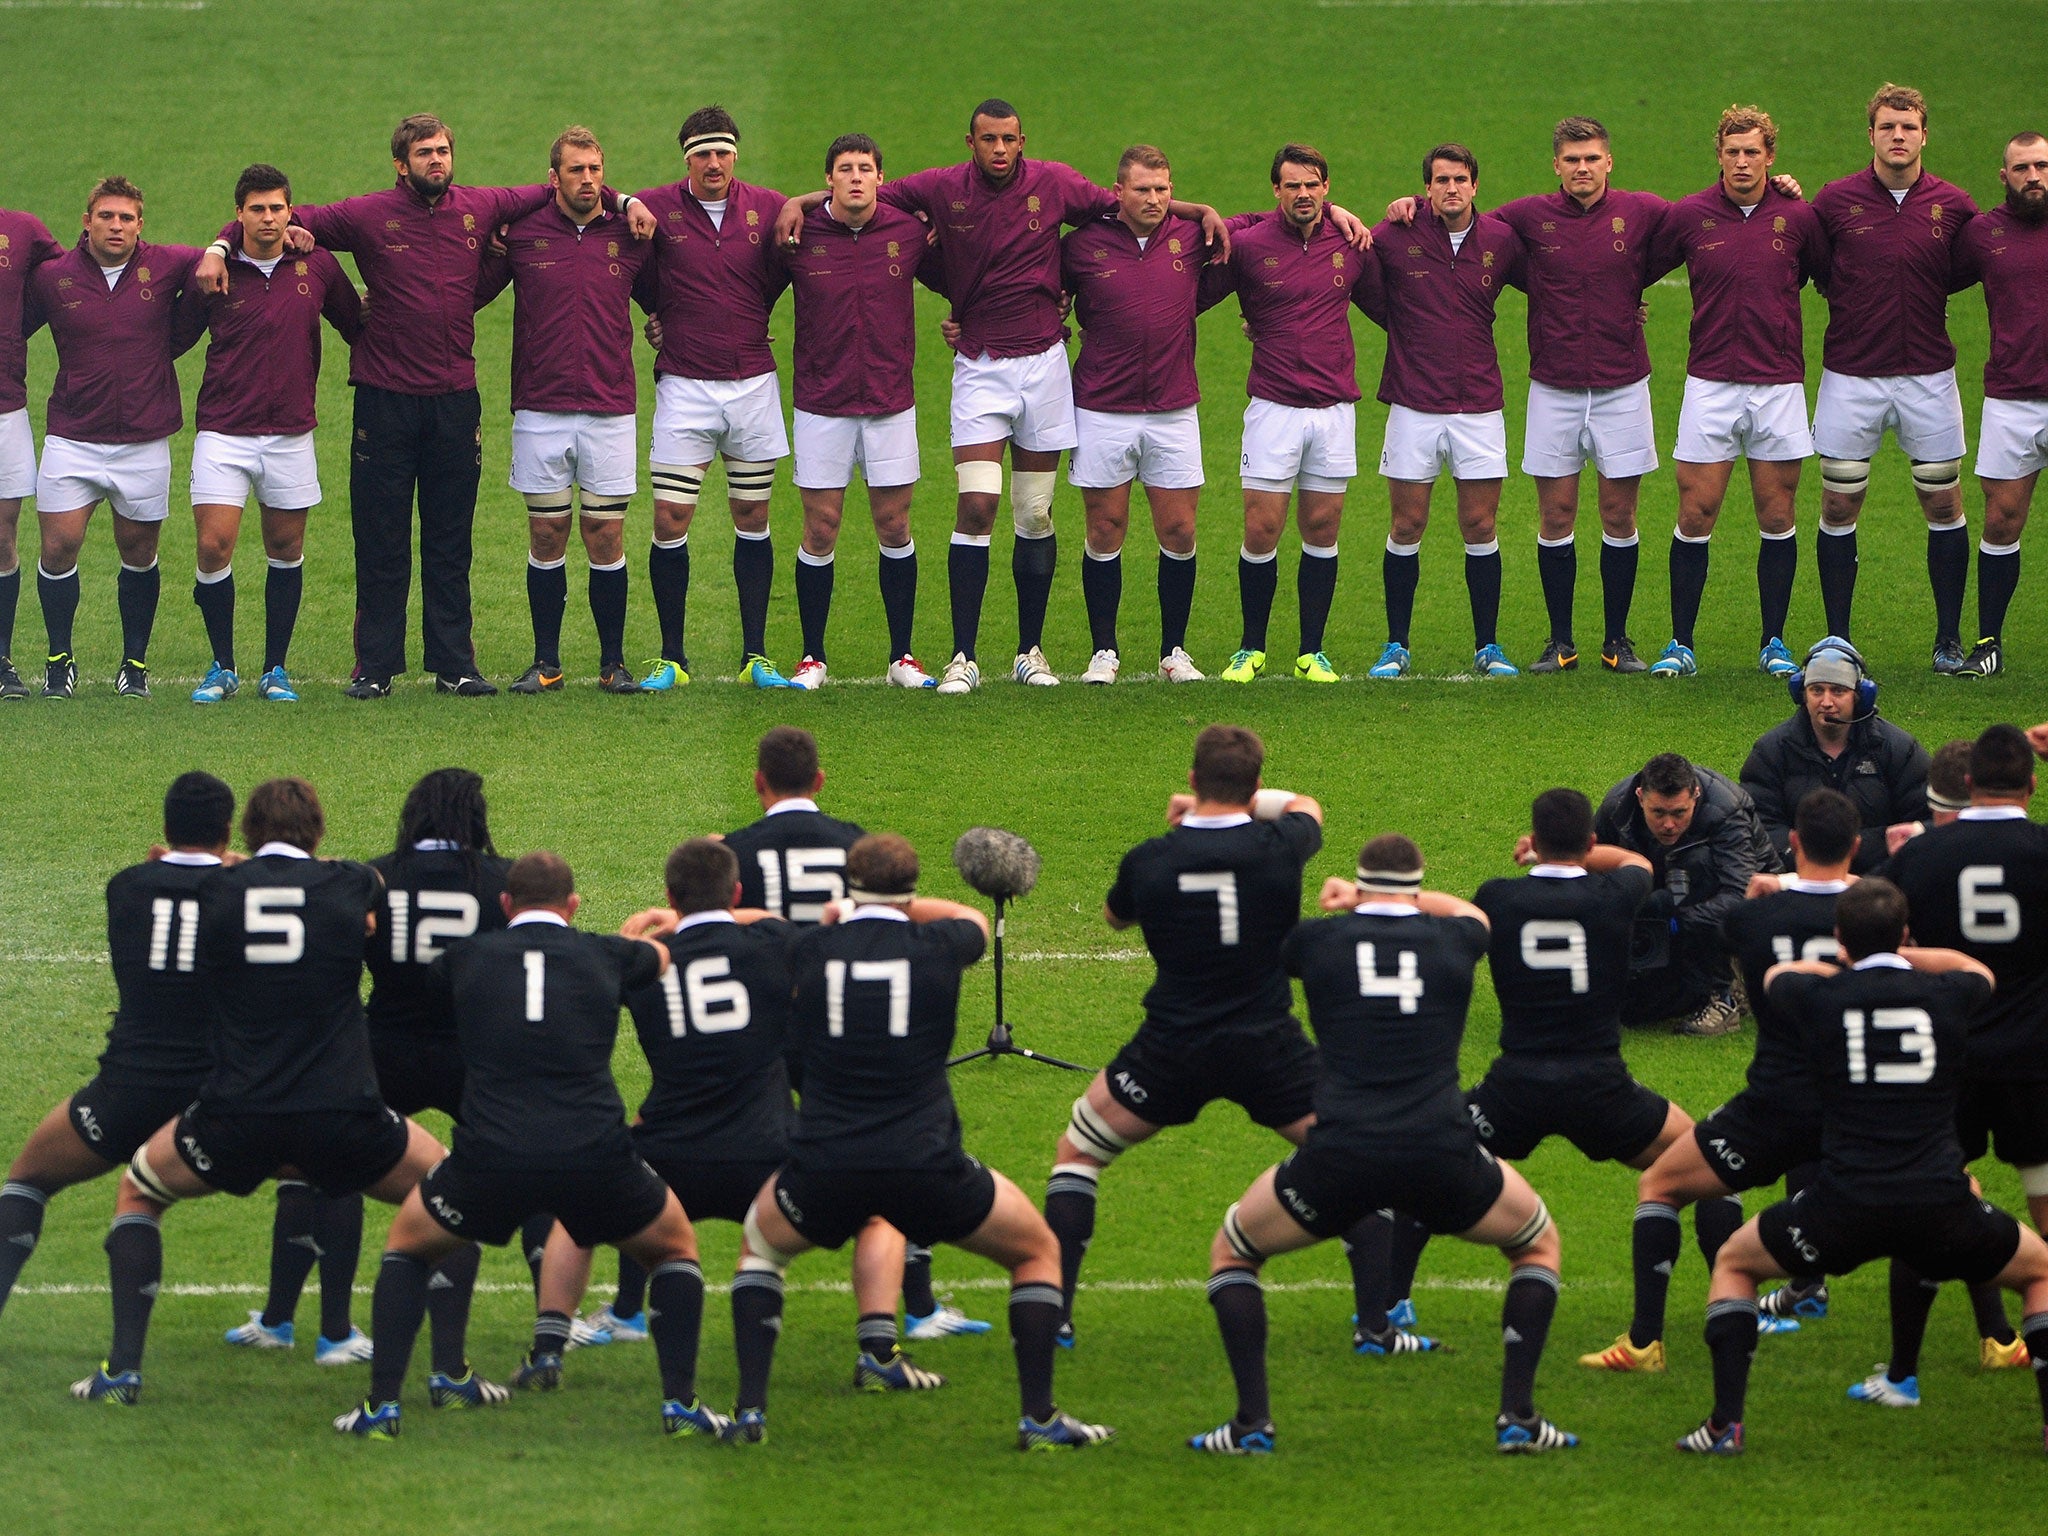 New Zealand perform the Haka in front of England's squad